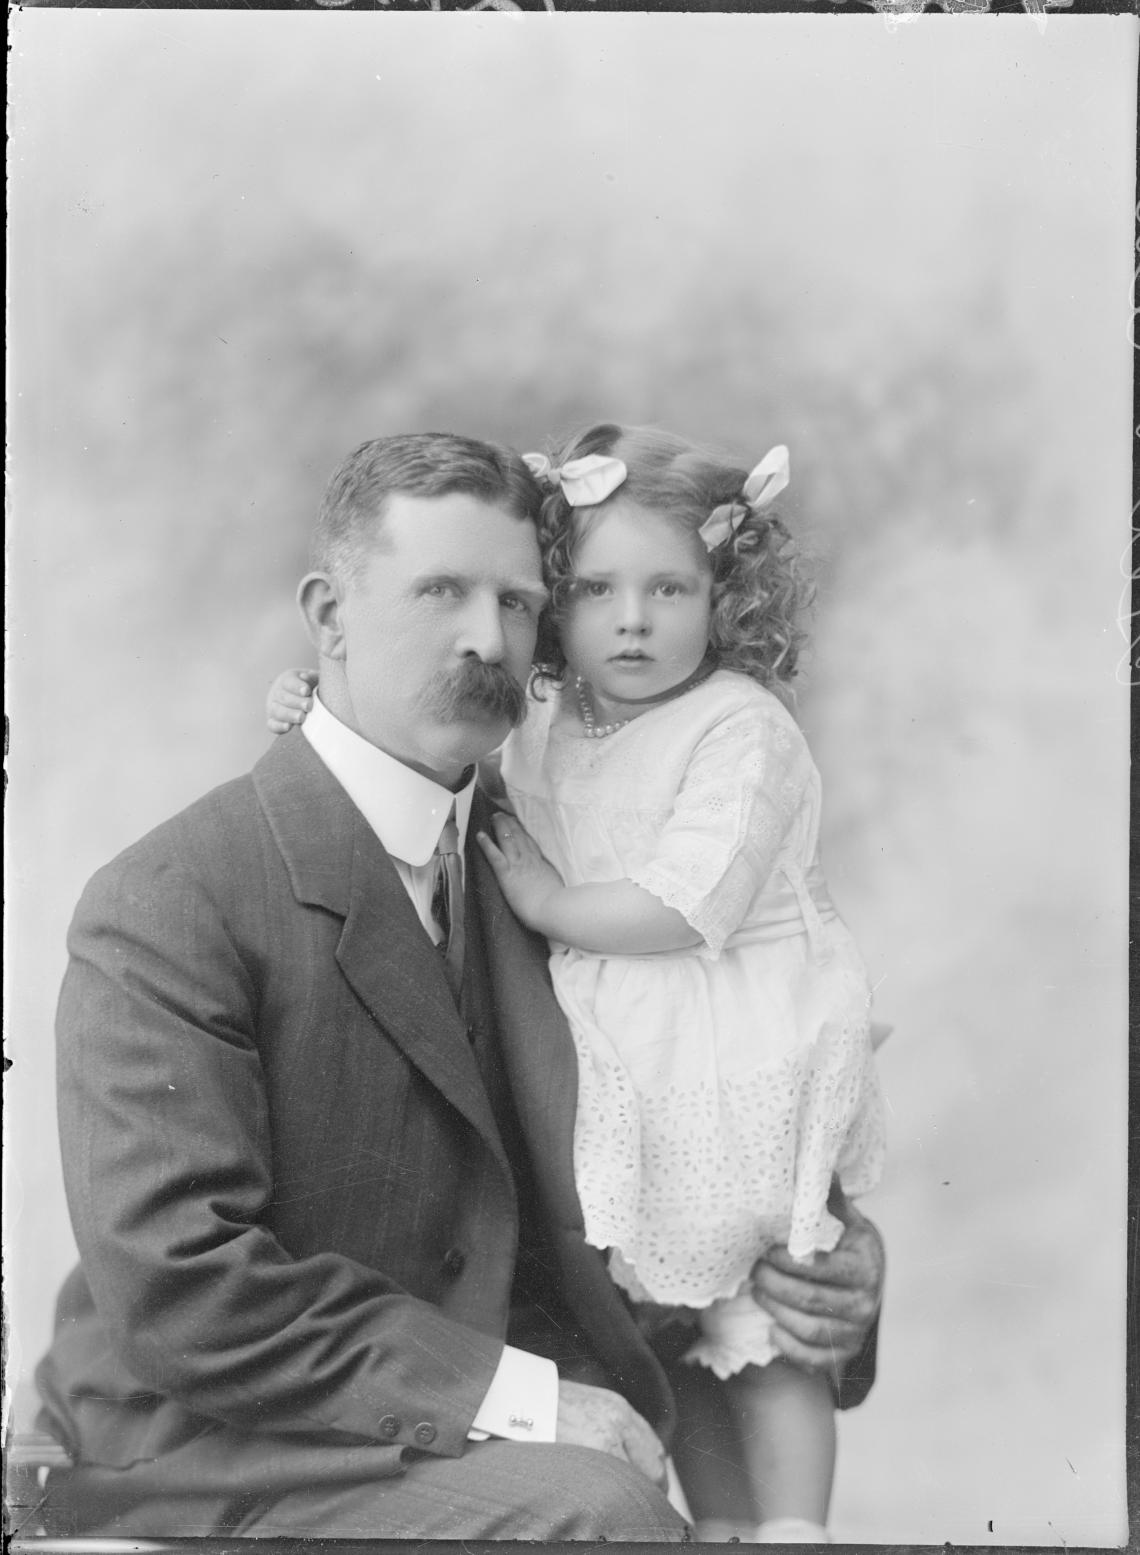 151432PDWilliam Henry Gumbleton and daughter possibly Shiela c1914